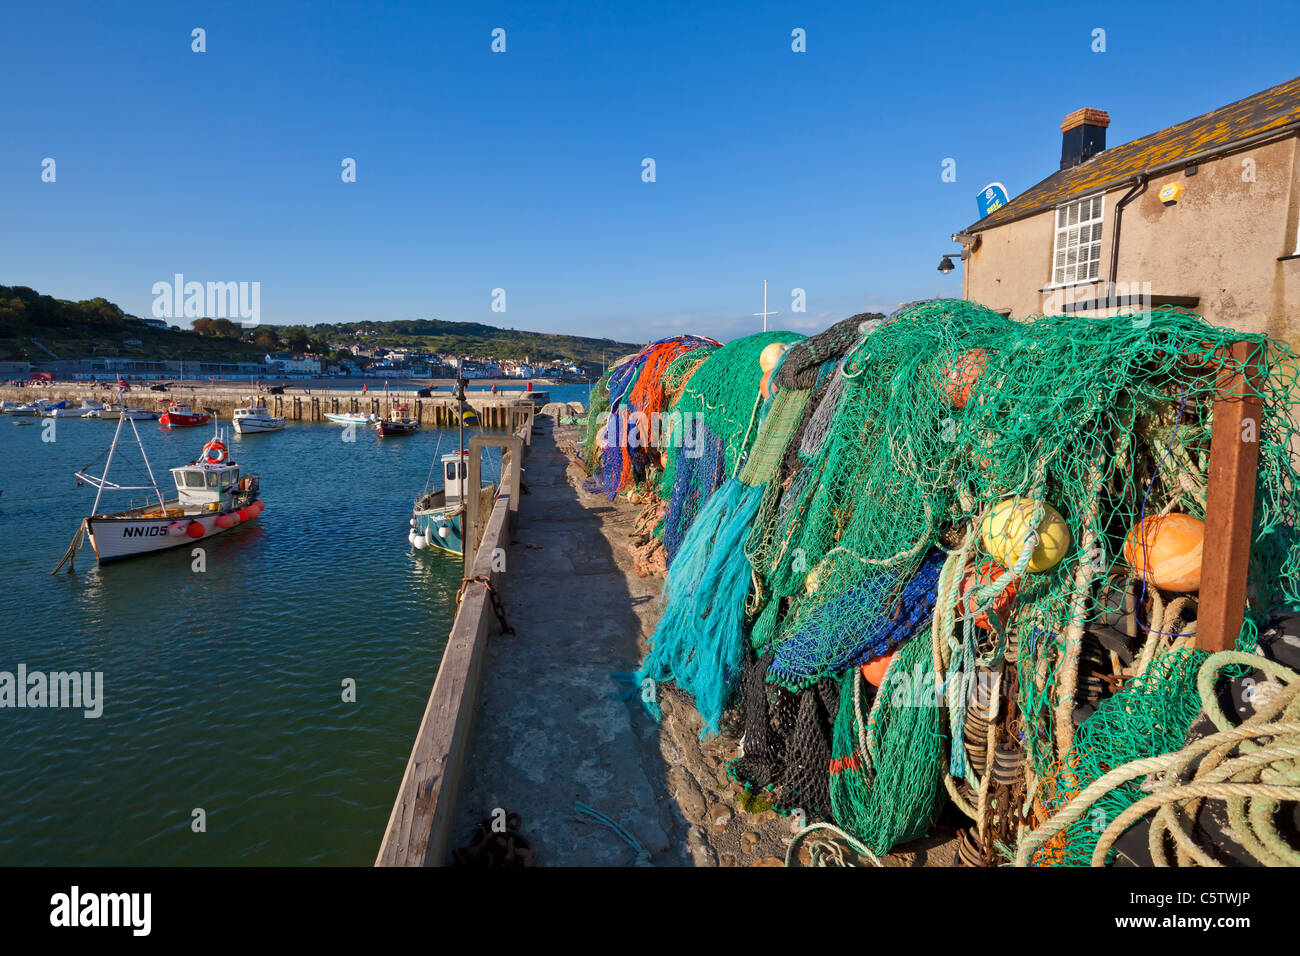 Fishing nets and floats on the harbour wall in Lyme Regis harbour Dorset England UK GB EU Europe Stock Photo